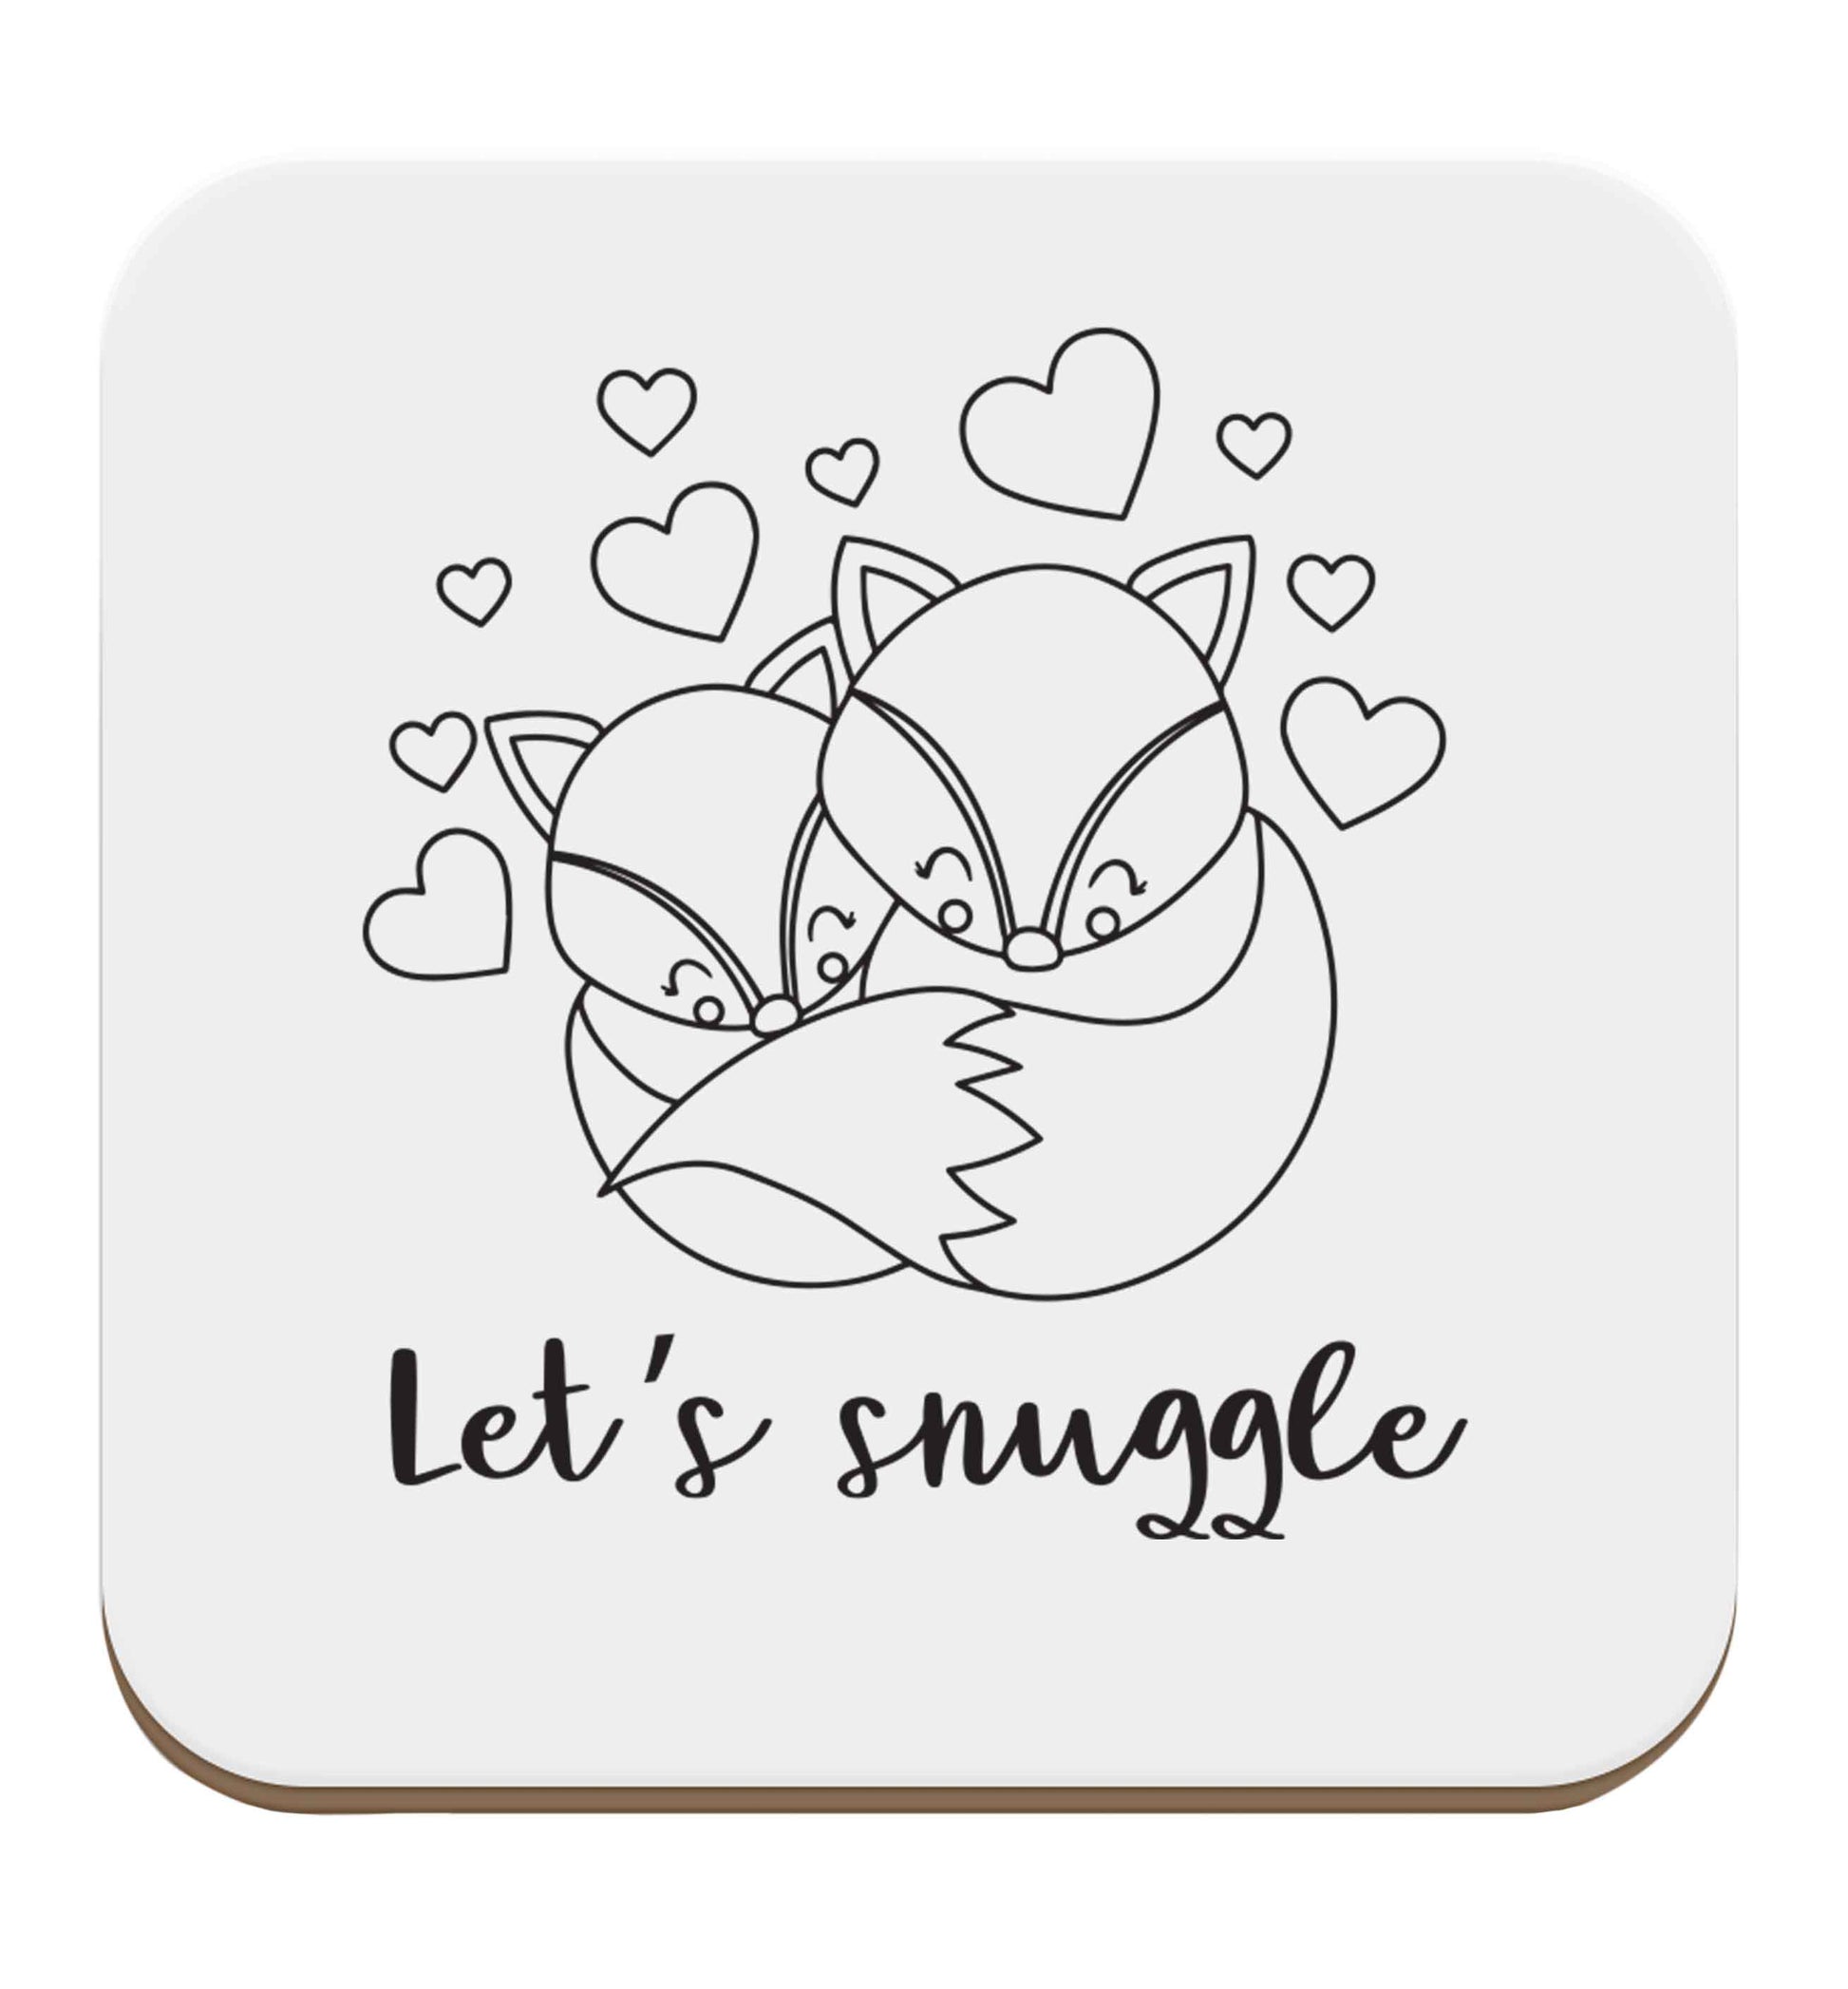 Let's snuggle set of four coasters